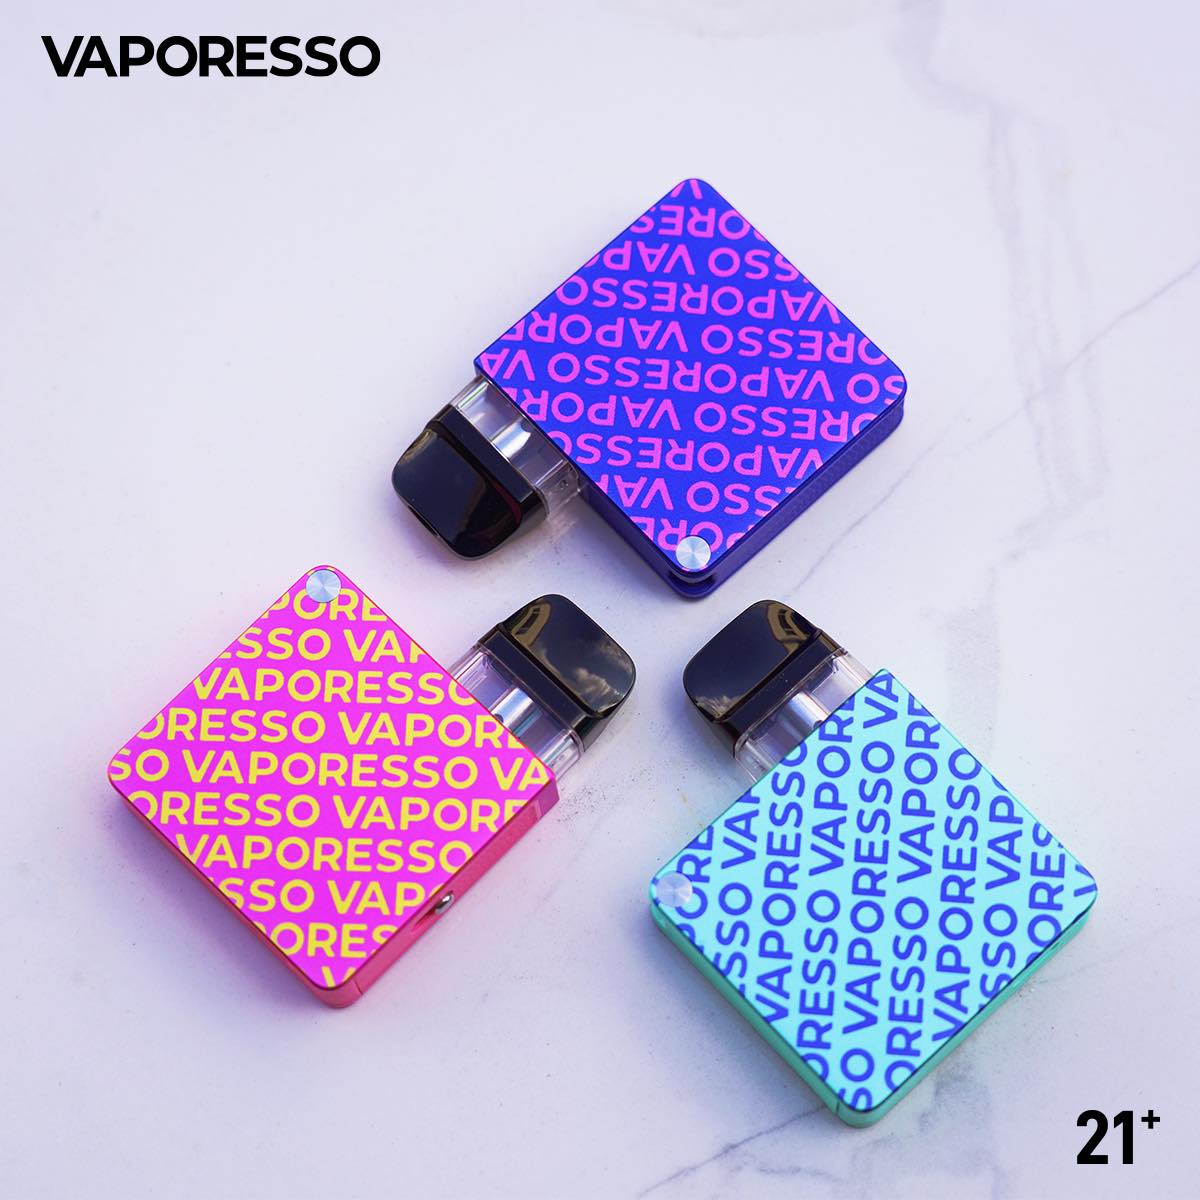 Featured Post Image - Vaporesso Vaping Products Review: A User’s Flavorful Odyssey of Delights